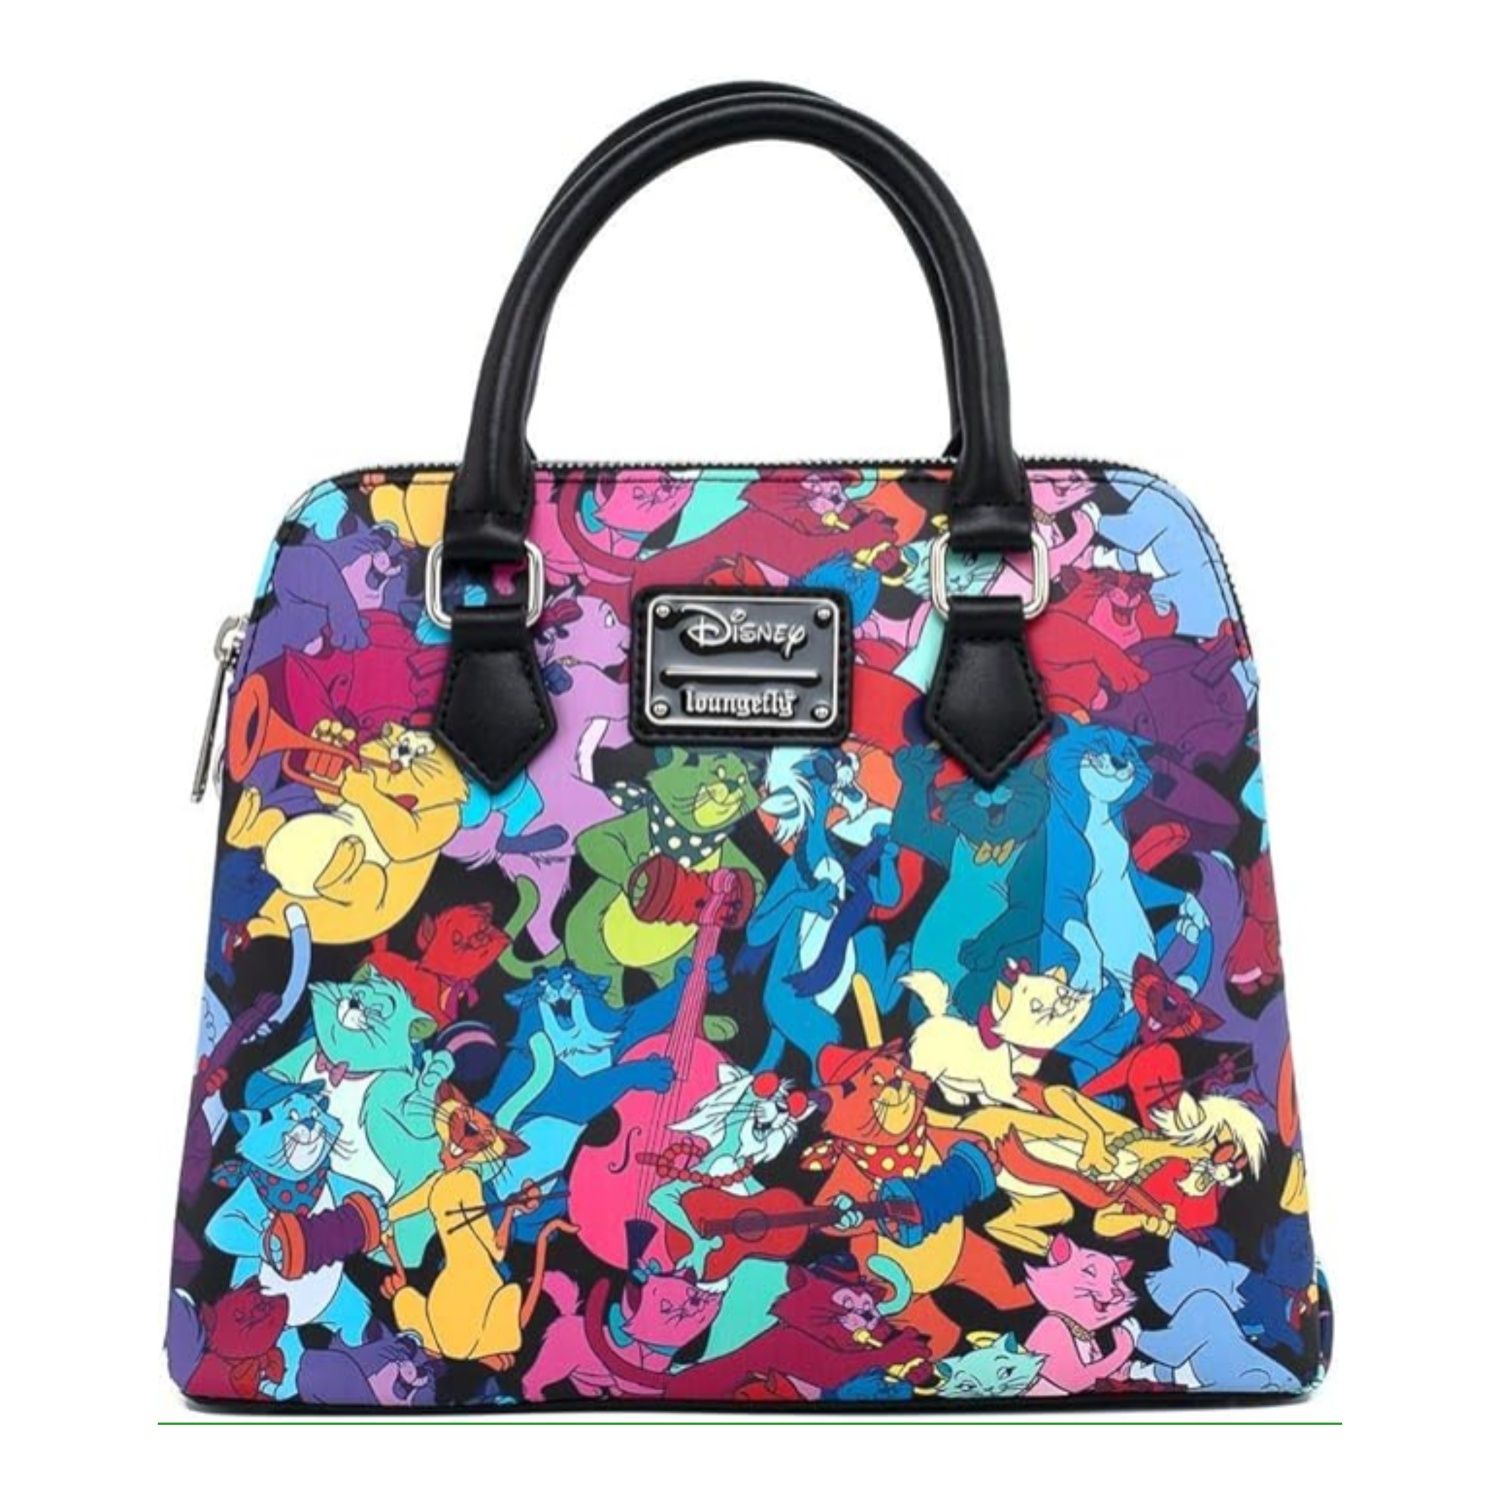 This bag has all the Aristocats printed on it in different colors.